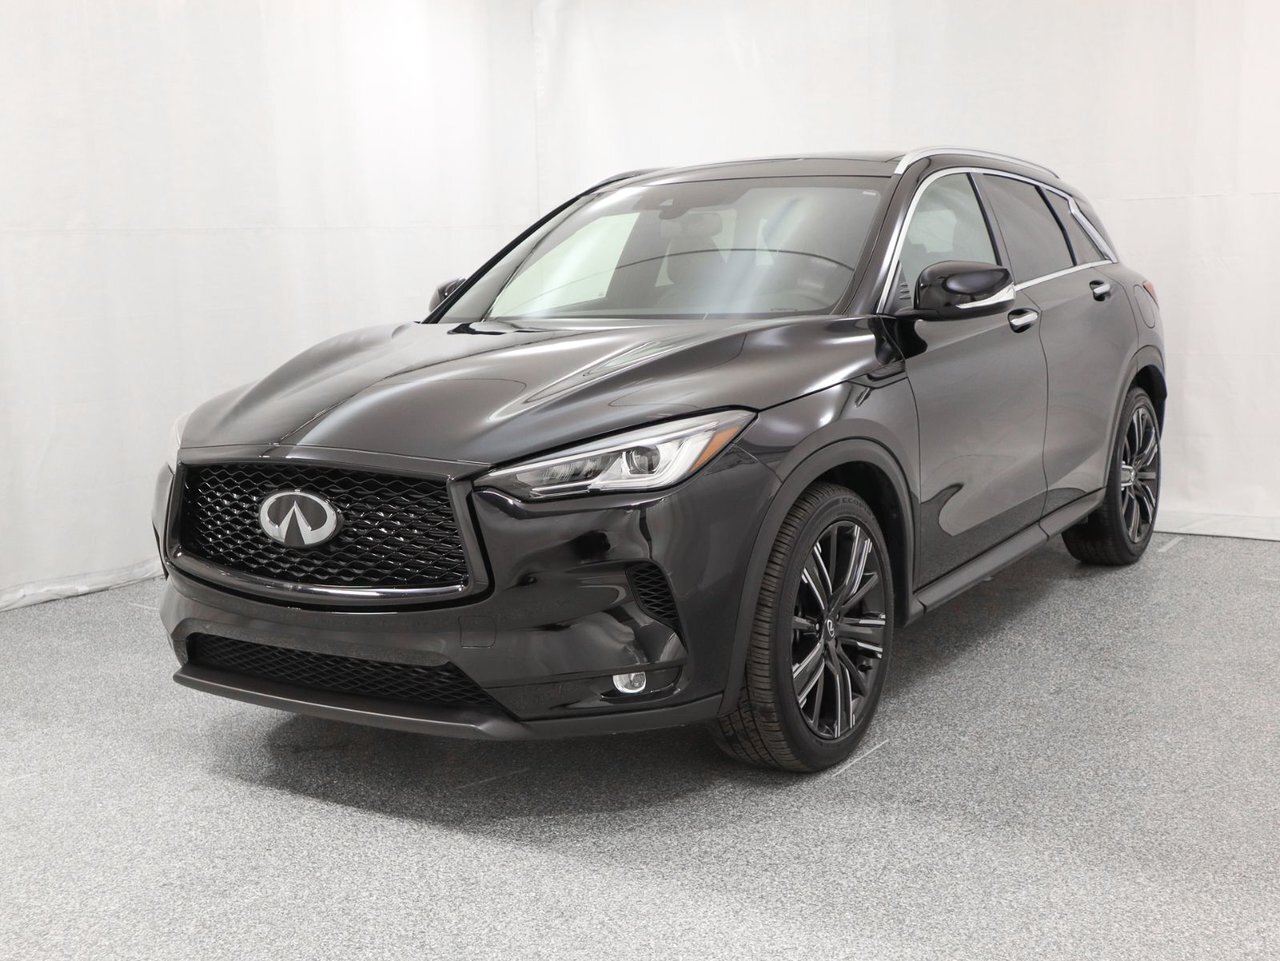 2022 Infiniti QX50 LUXE LUXE I-LINE '20INCH WHEELS / BLACK PACK / LUX